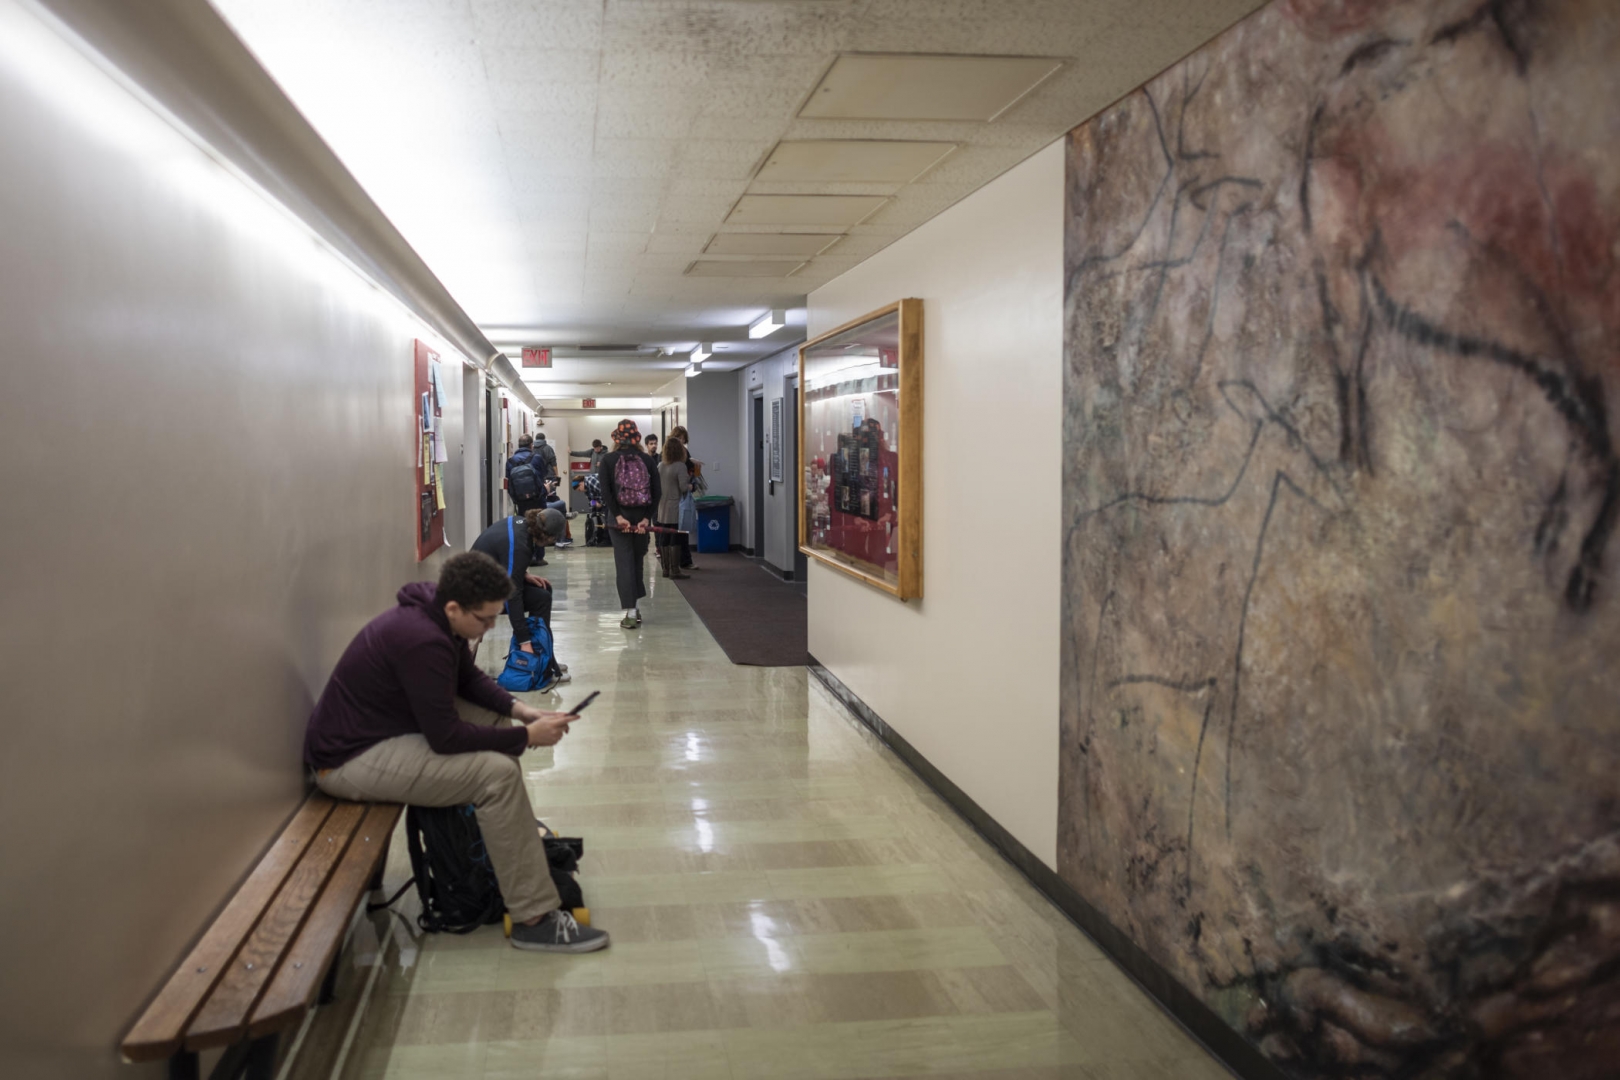 Students sit in the hallway of Butte Hall while waiting for class to start.